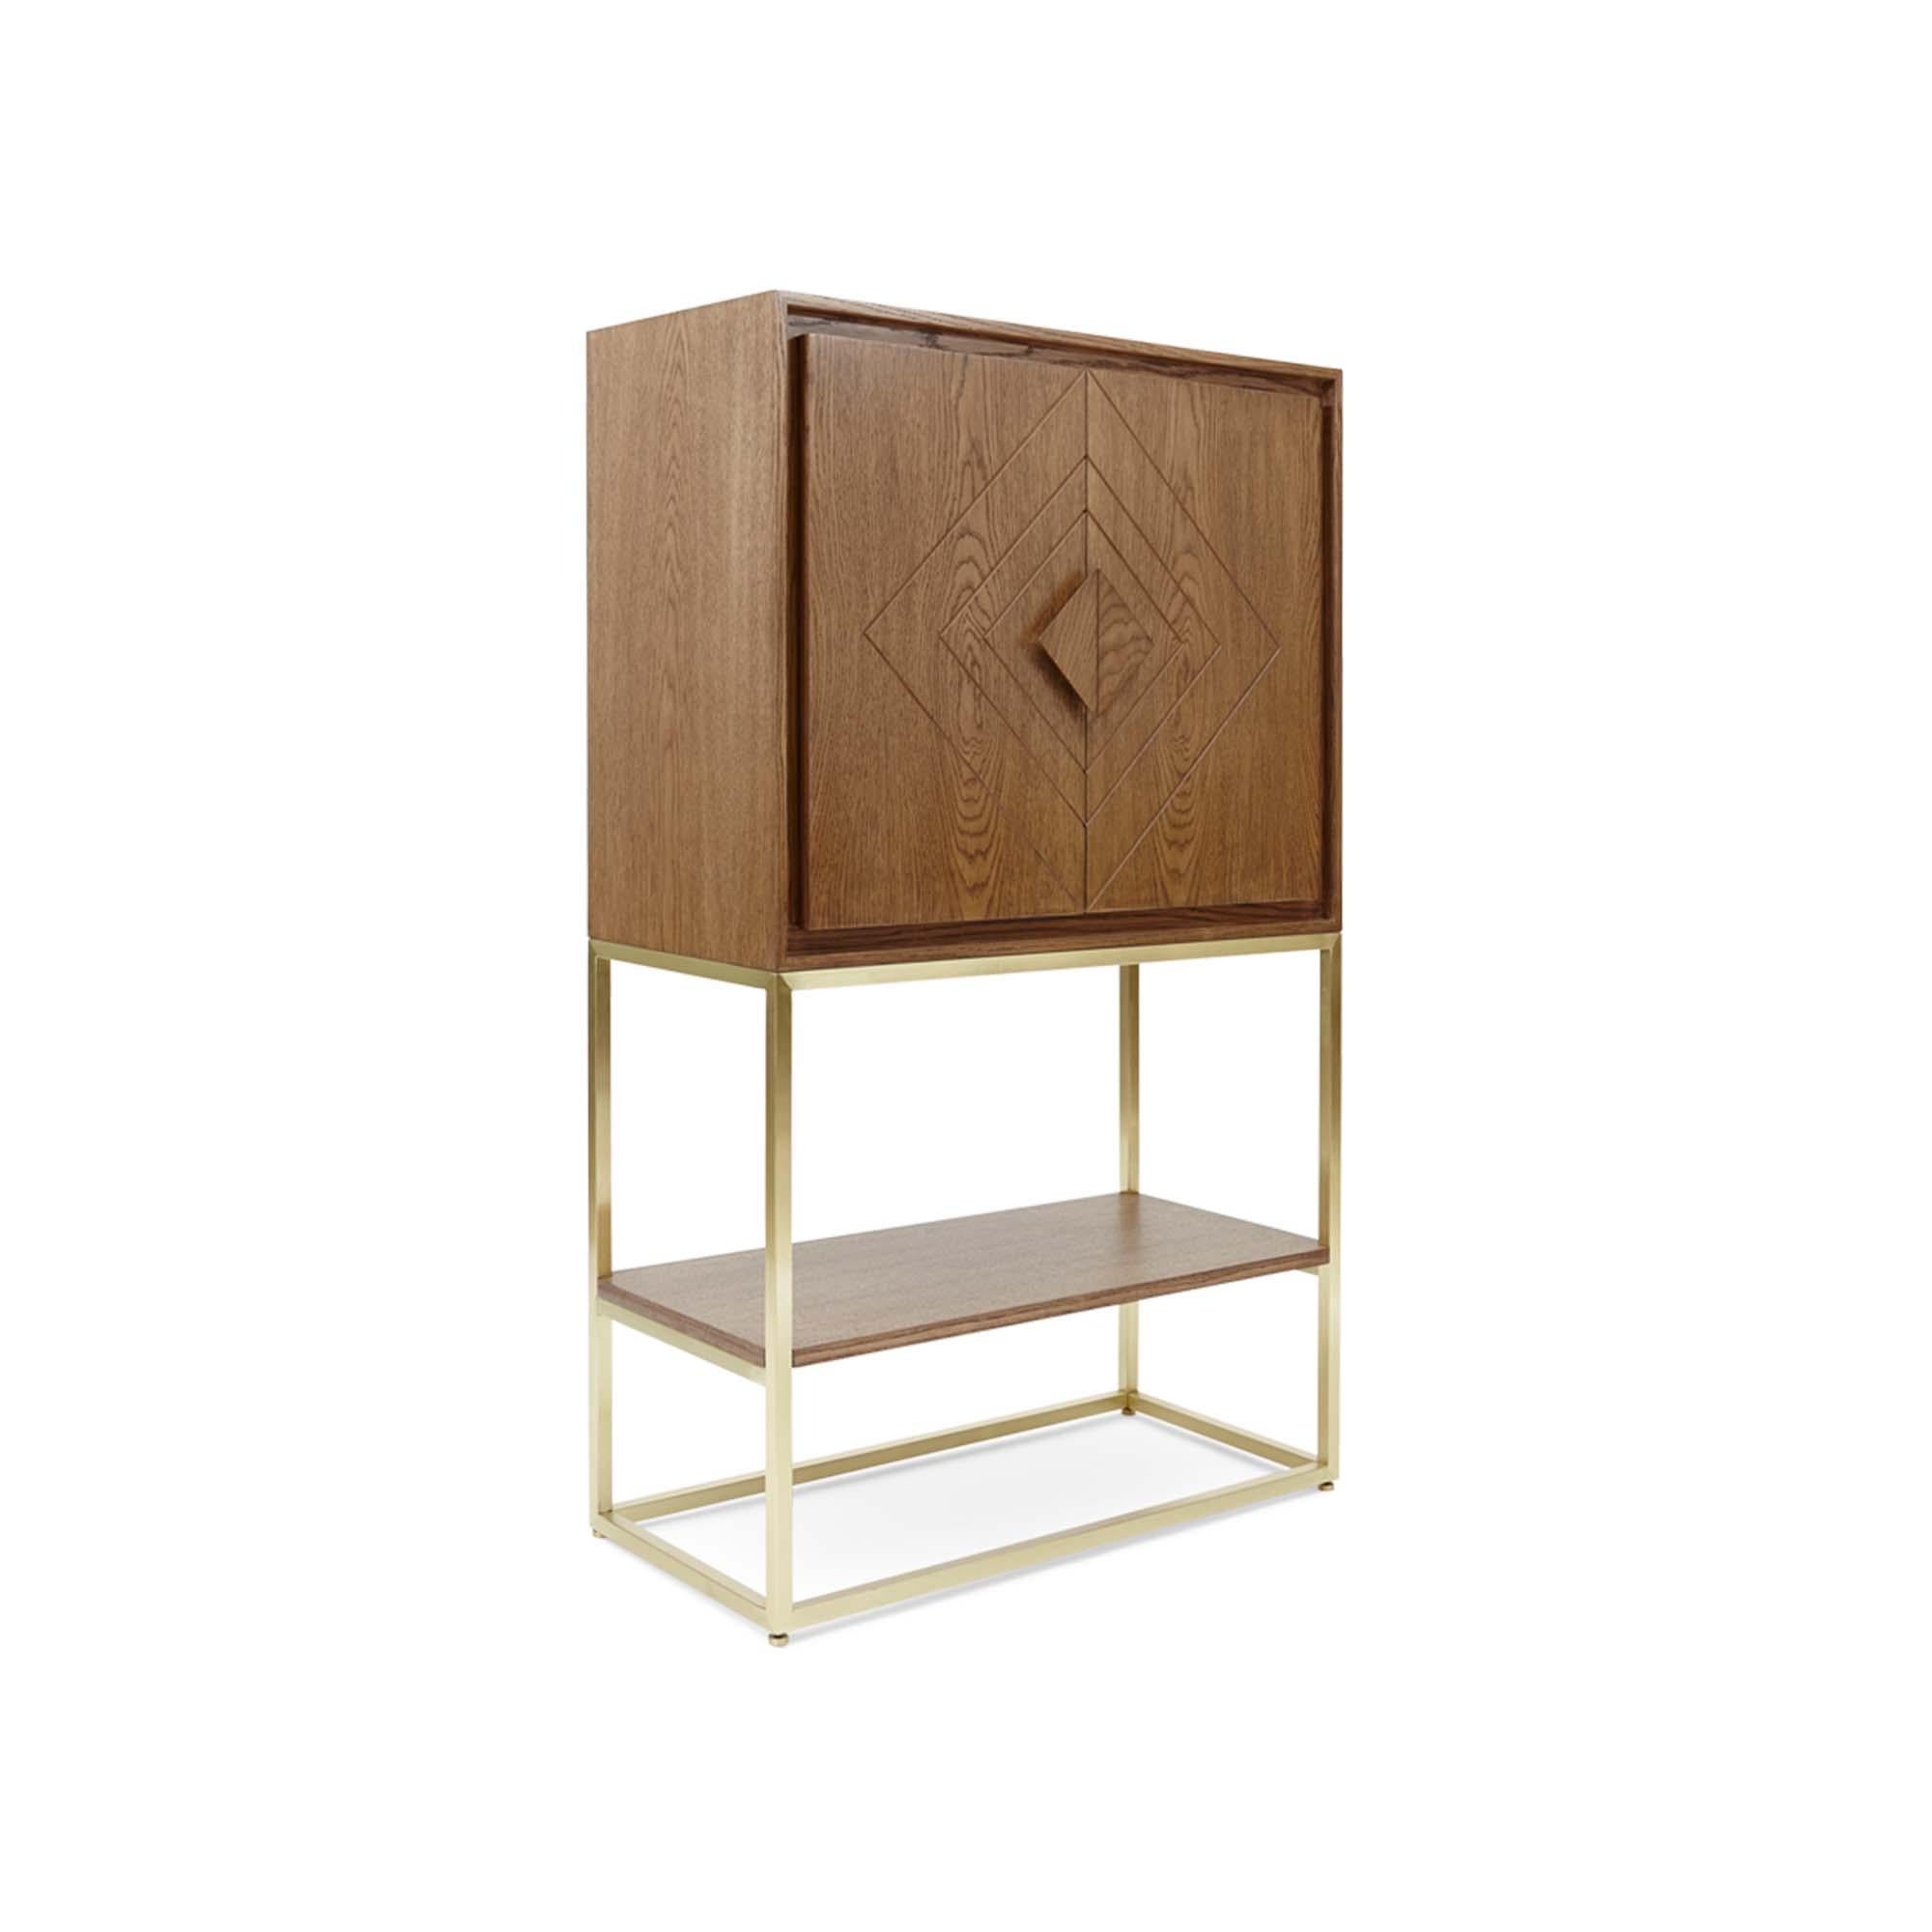 The Diamond Bar rests upon an open metal base with one shelf below and features a scribed geometric pattern on its doors. The interior has a bronze mirror back, glassware shelf with a small drawer, and a removable bronzed mirrored tray. 

The